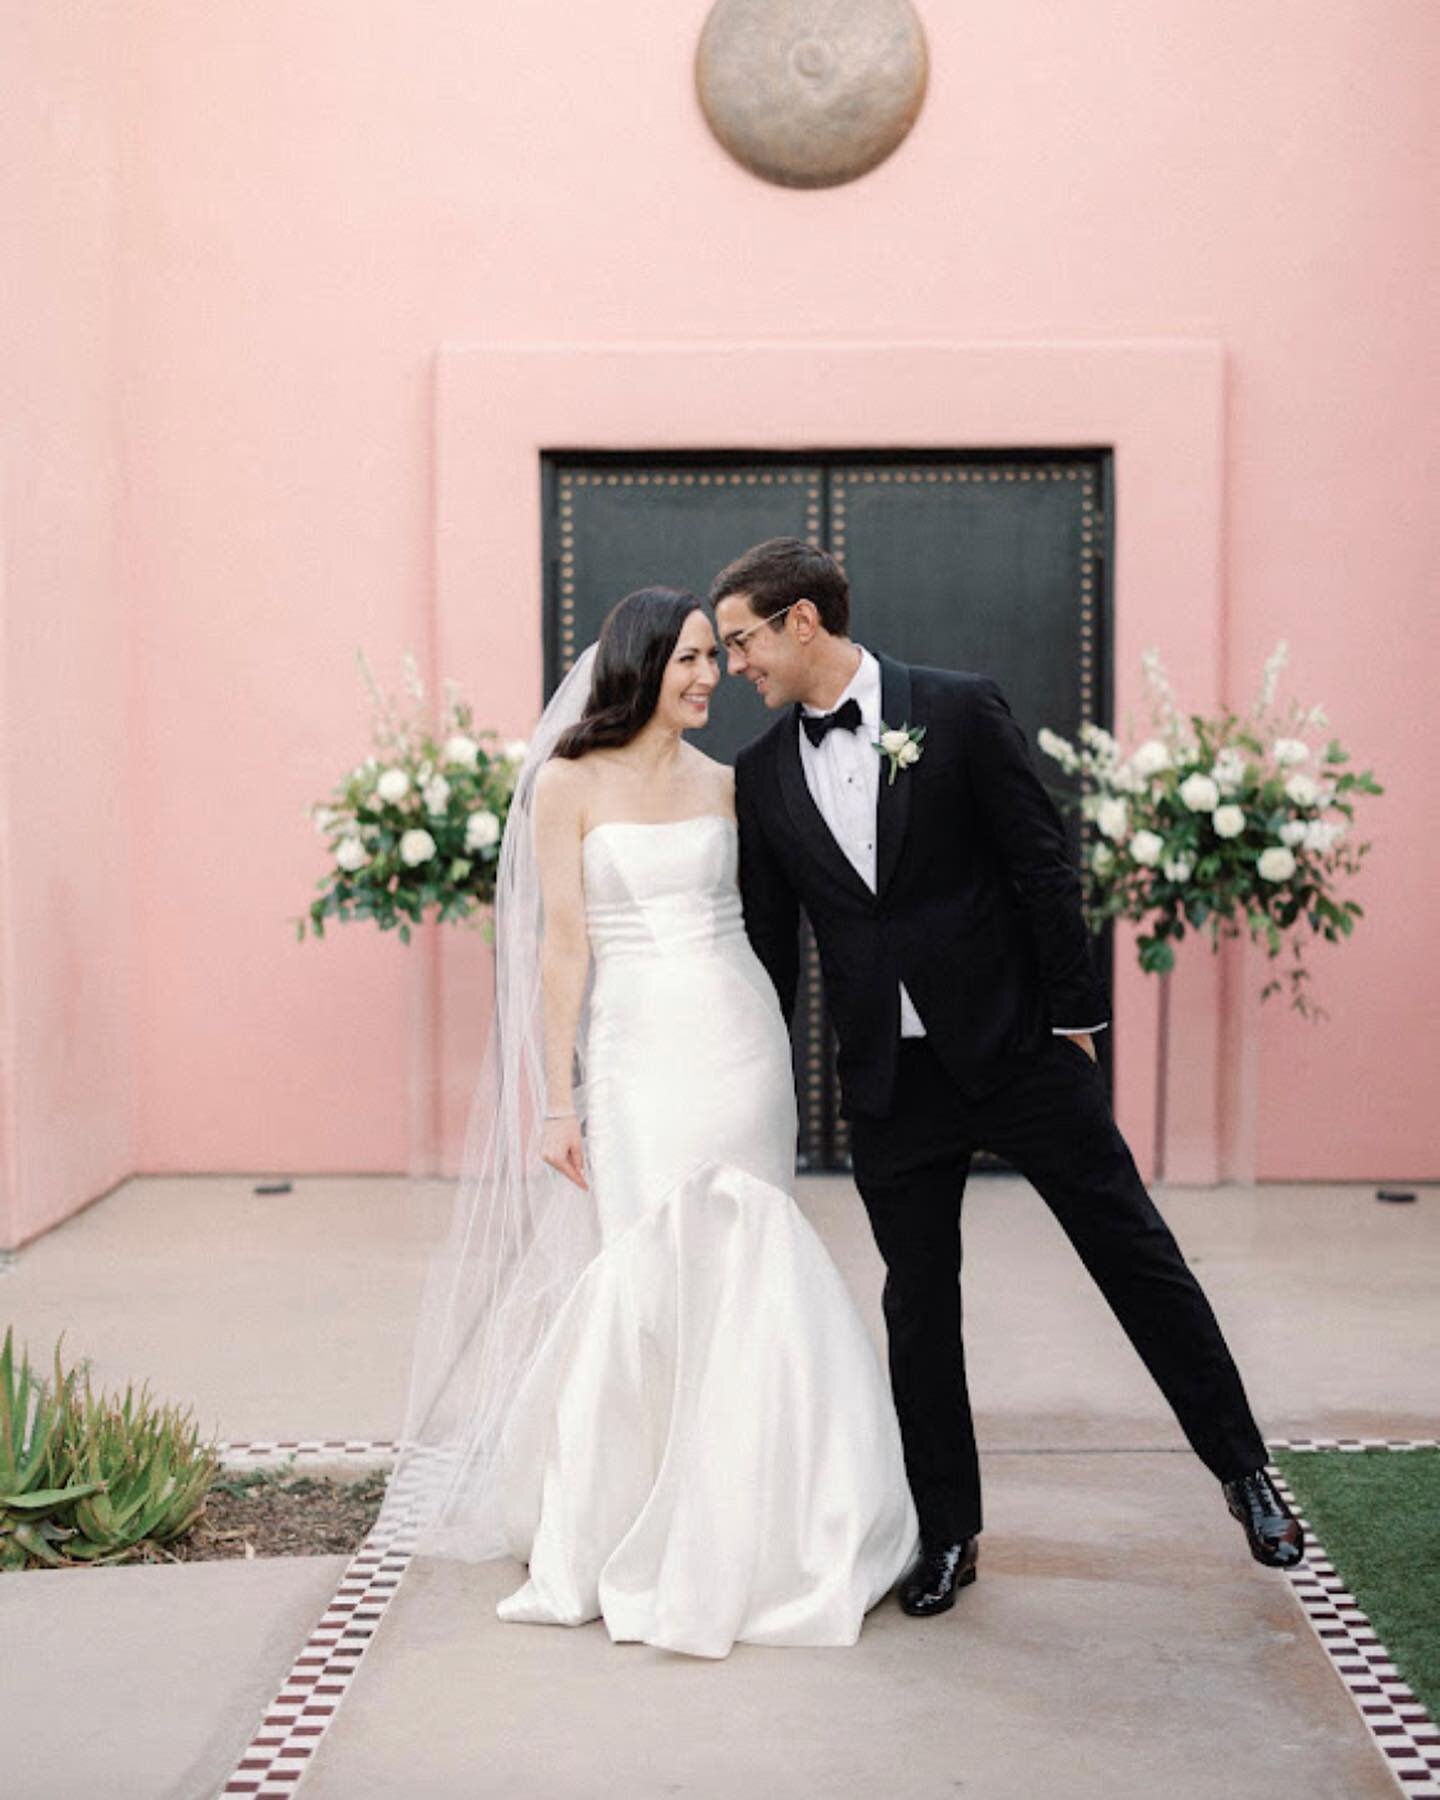 Because Palm Springs is always a good idea &hellip;. and we can&rsquo;t get enough of this gallery from @allielindseyphotography 🌴🪩🤍

Venue: @sandshotelspa
Planner: @everlybymge @carabenthal 
Florist: @soireefloraldesign
Photography: @allielindsey